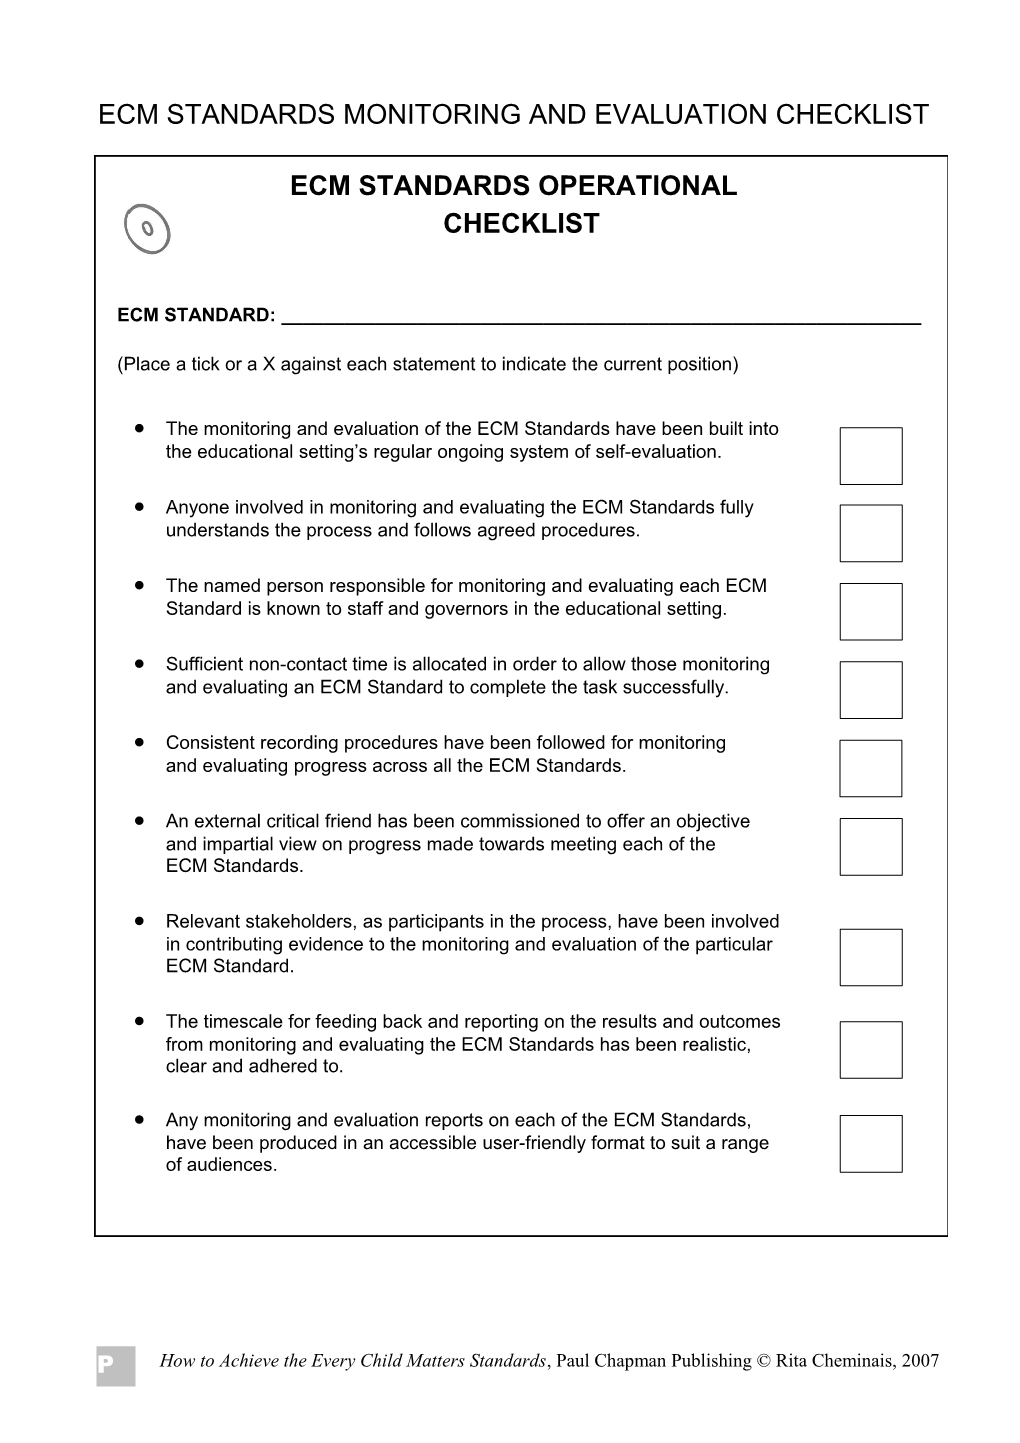 Ecm Standards Monitoring and Evaluation Checklist